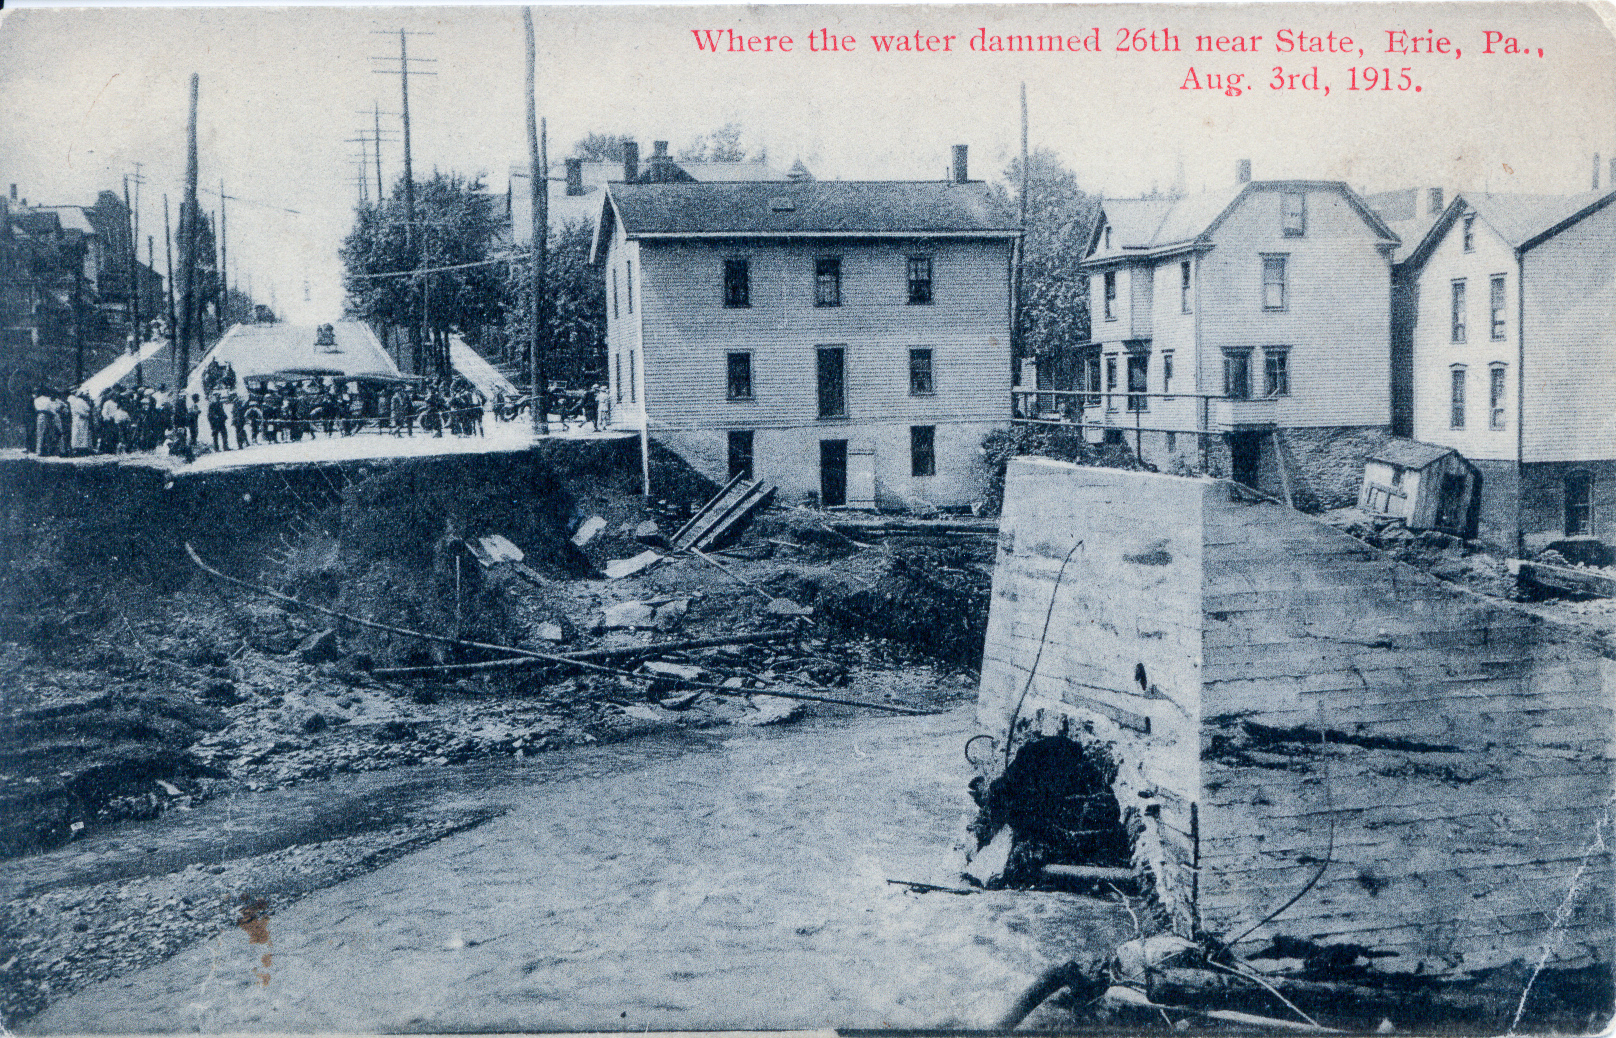 Where the water dammed 26th near State, Erie PA, Aug 3rd 1915